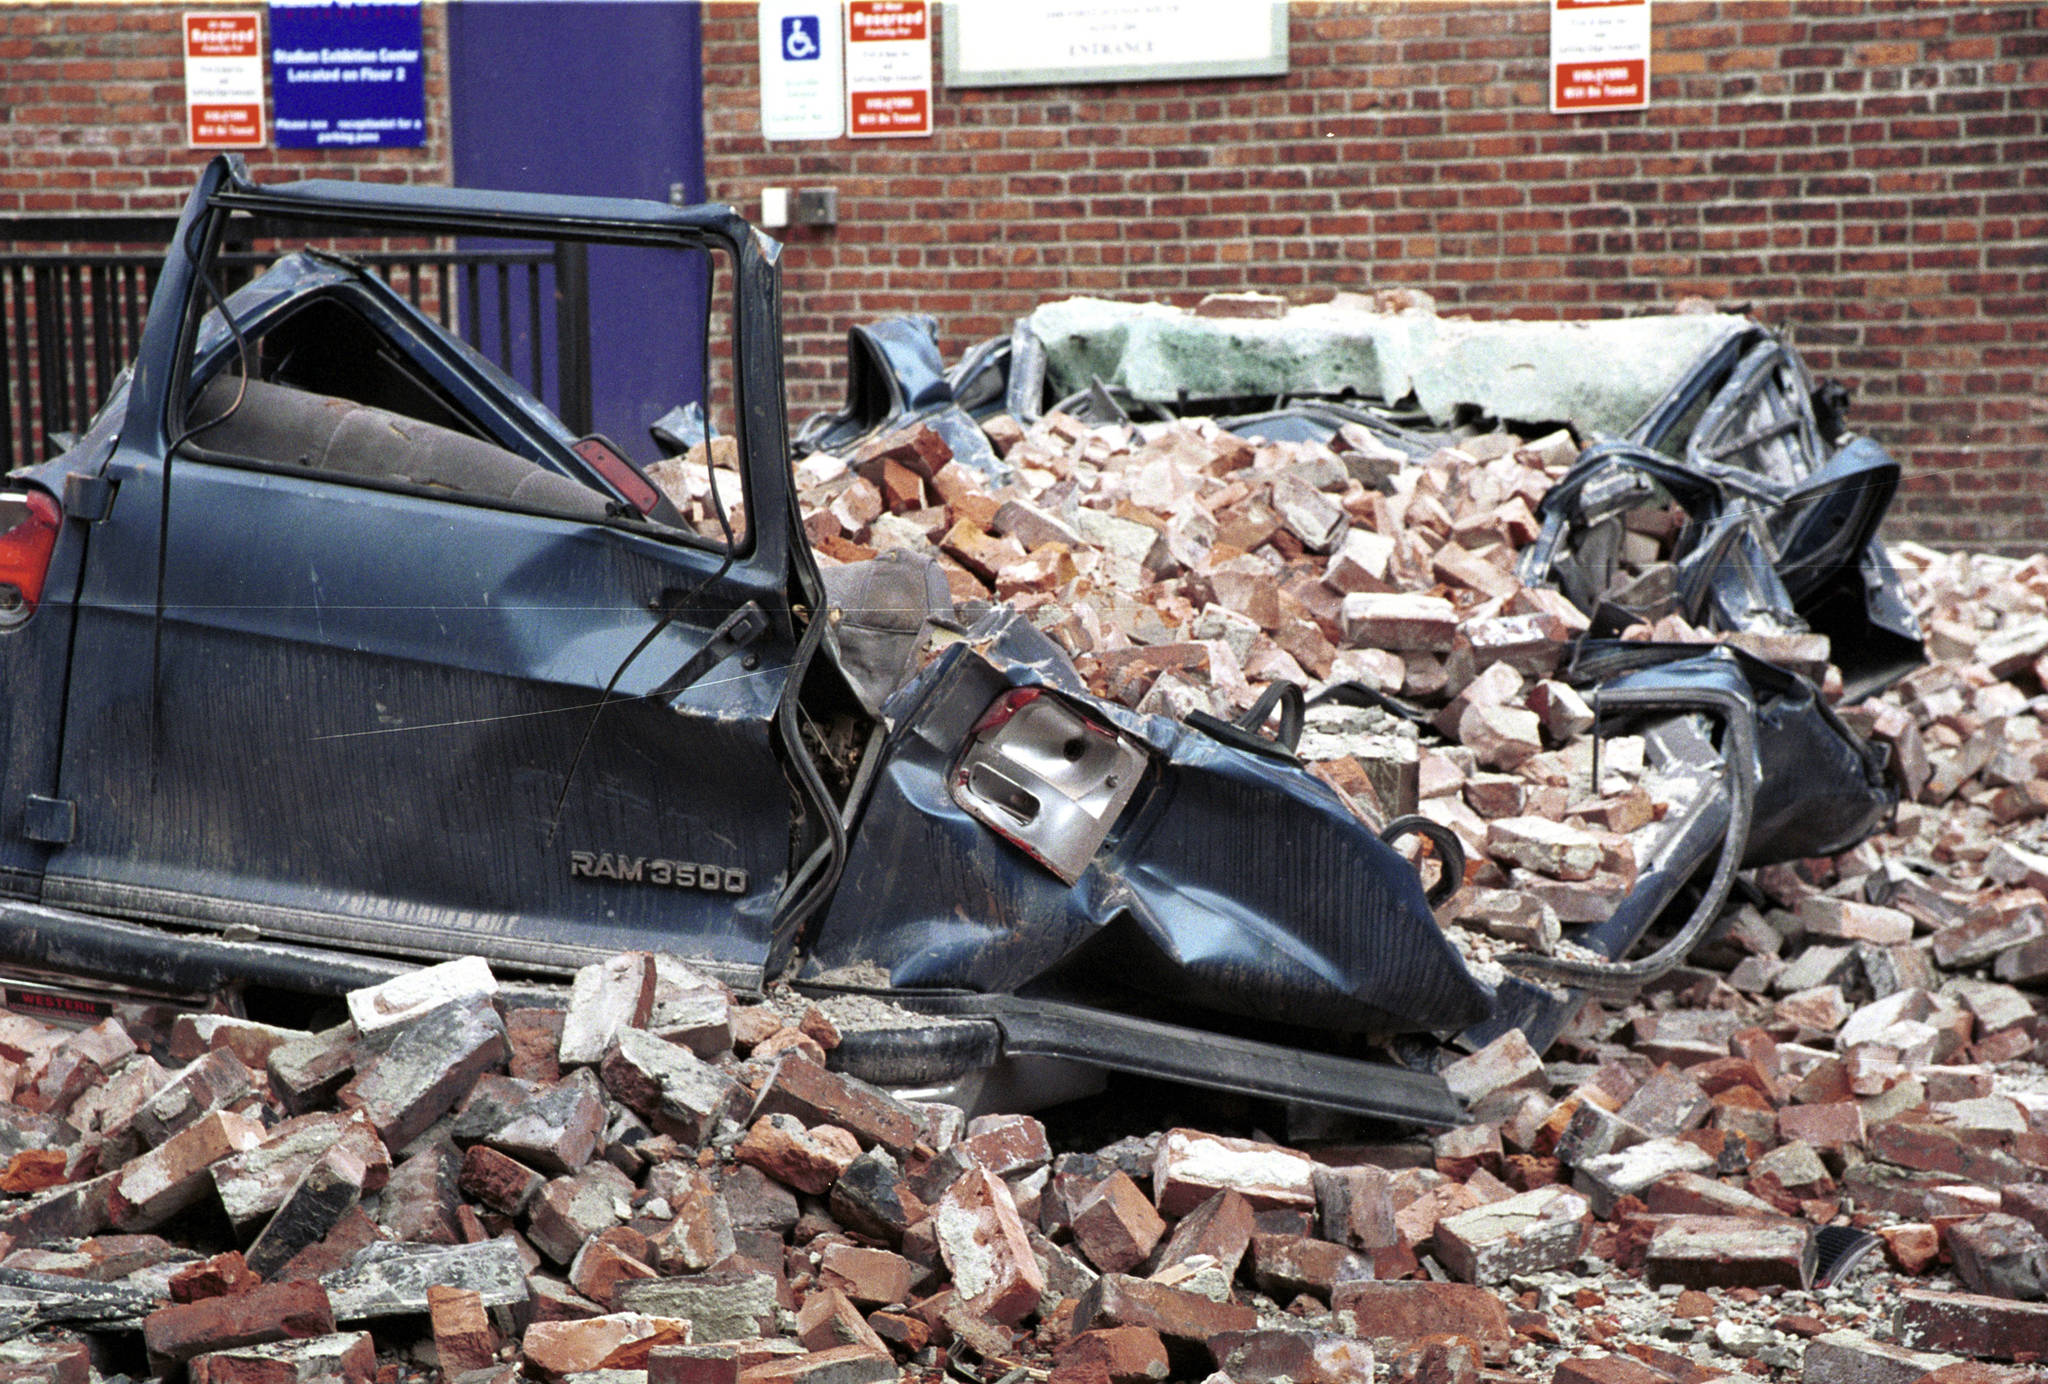 As seen on March 4, 2001, a large van was crushed by earthquake debris                                in a Seattle parking lot. FEMA News Photo by Kevin Galvin                                As seen on March 4, 2001, a large van was crushed by earthquake debris in a Seattle parking lot. FEMA News Photo by Kevin Galvin